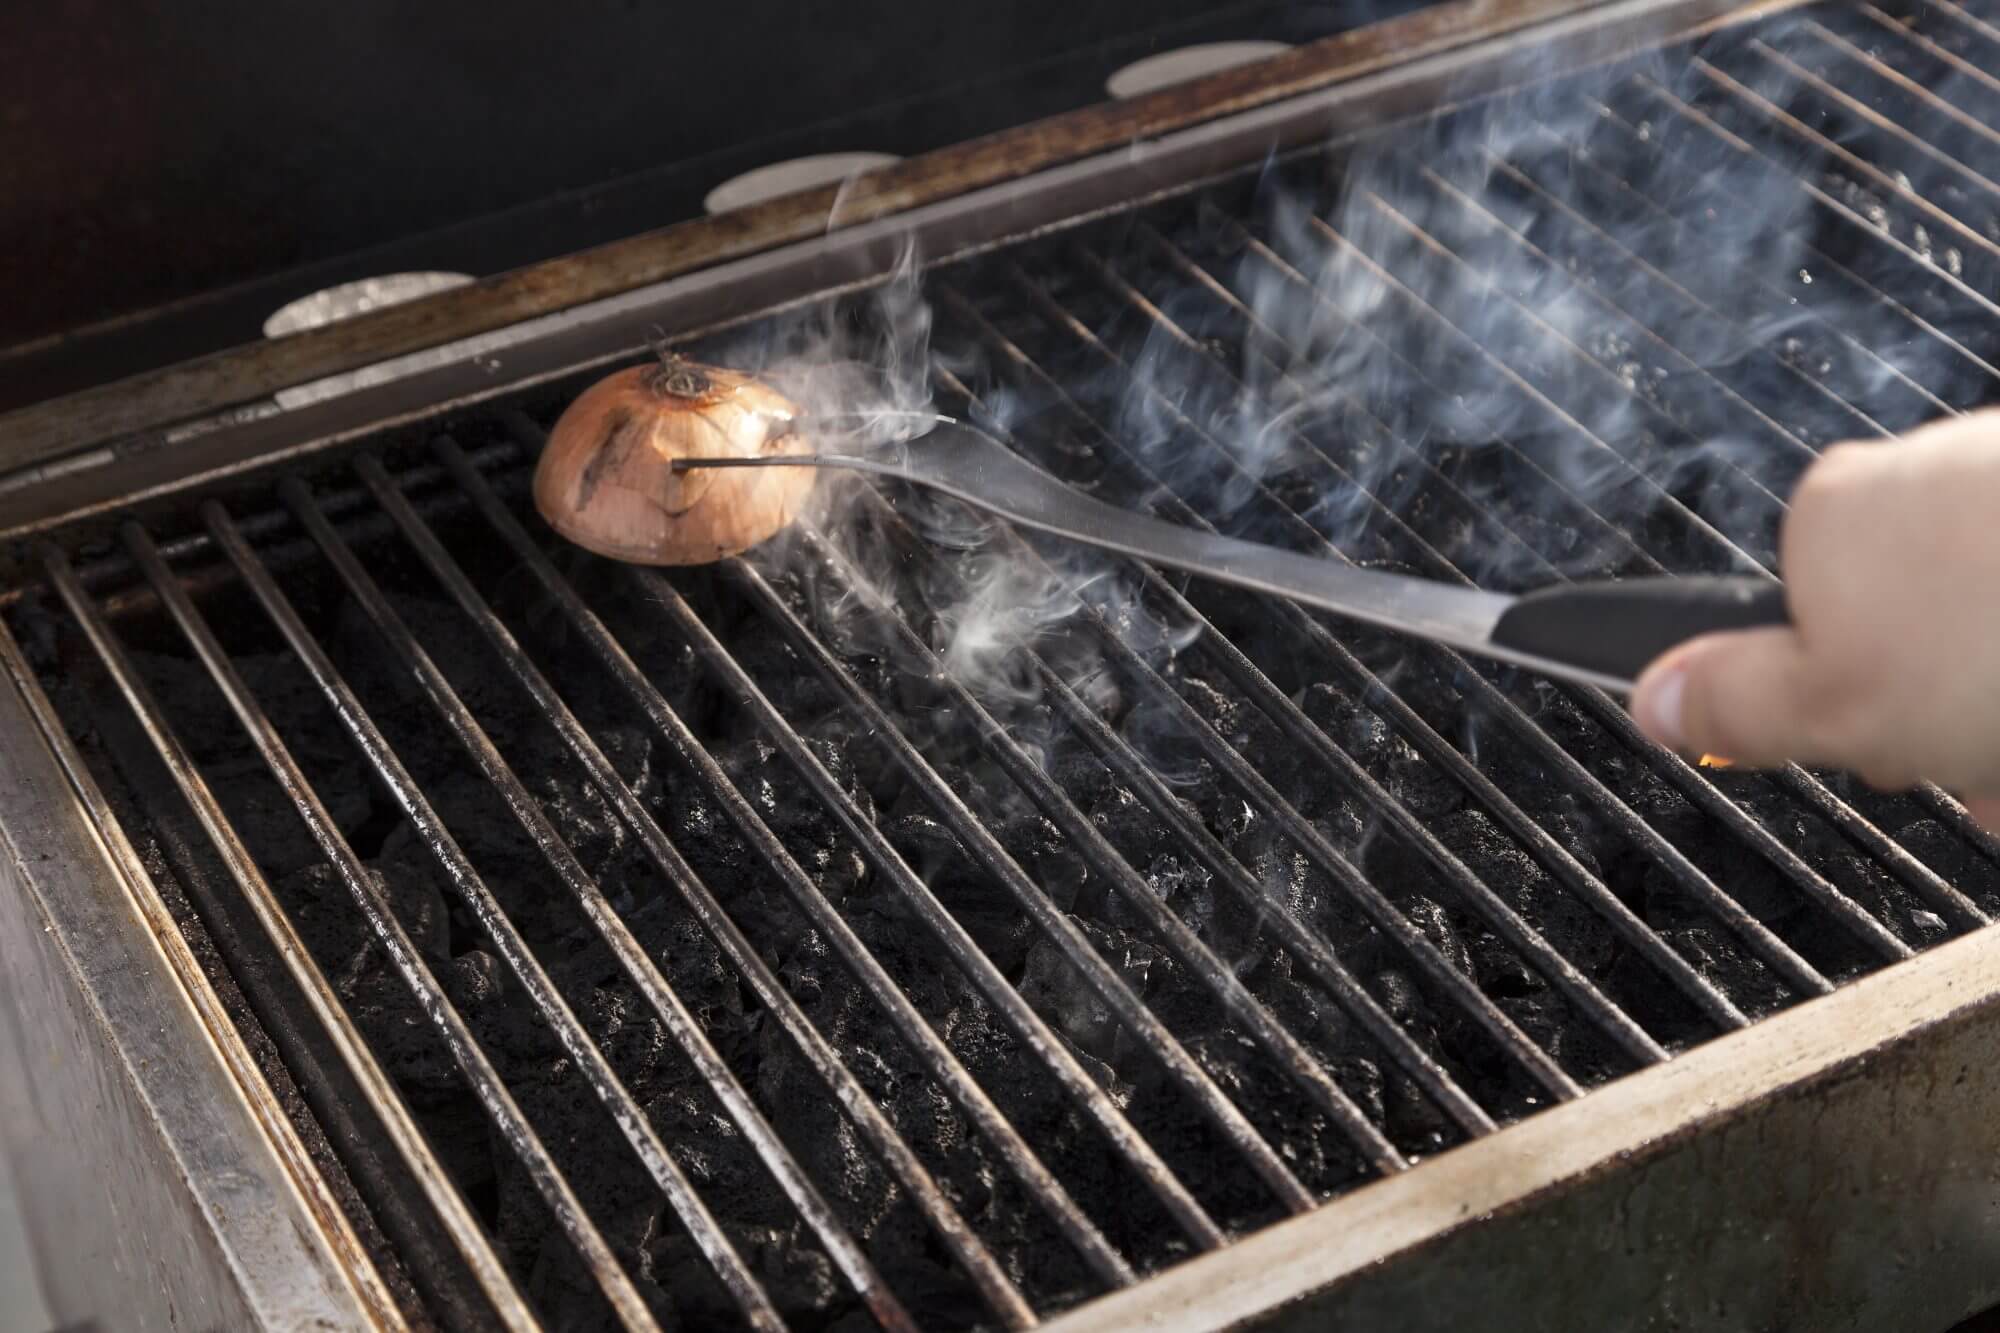 You can use onions to do some cleanups after grilling